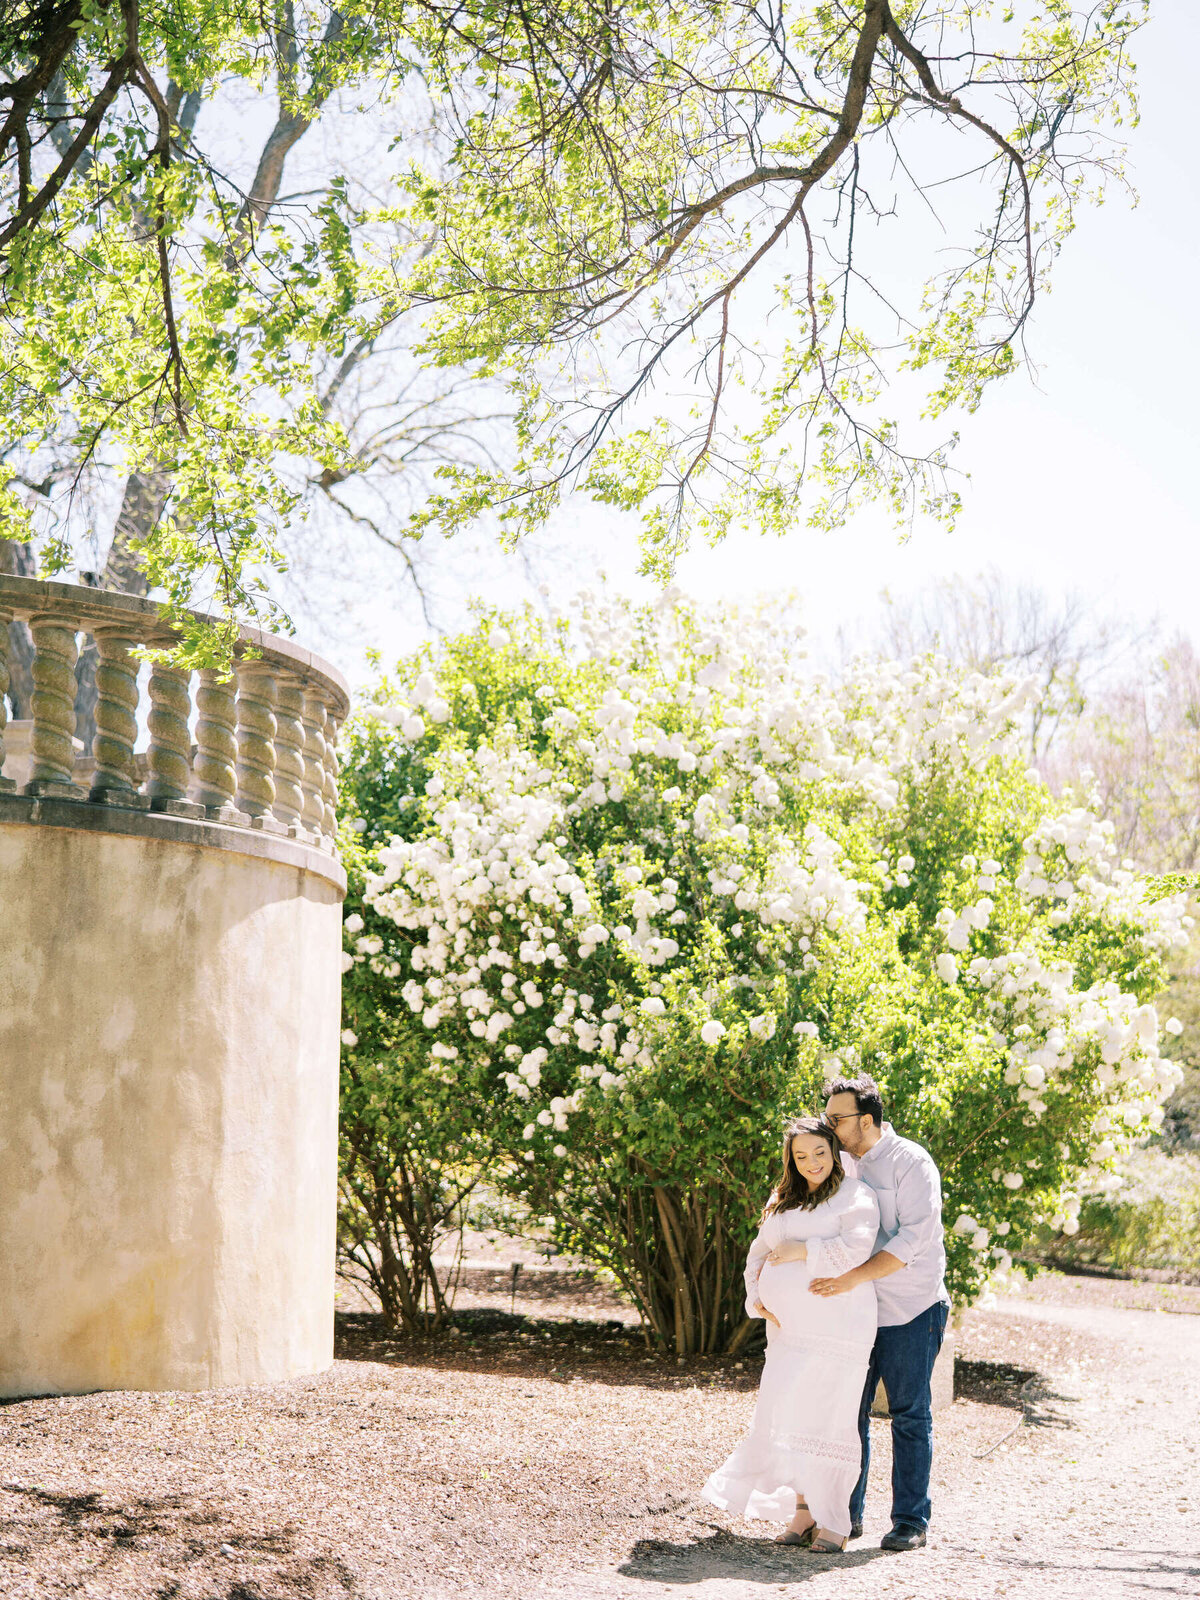 09 Dallas Arboretum Maternity Family Session Kate Panza Photography Kim and Nic